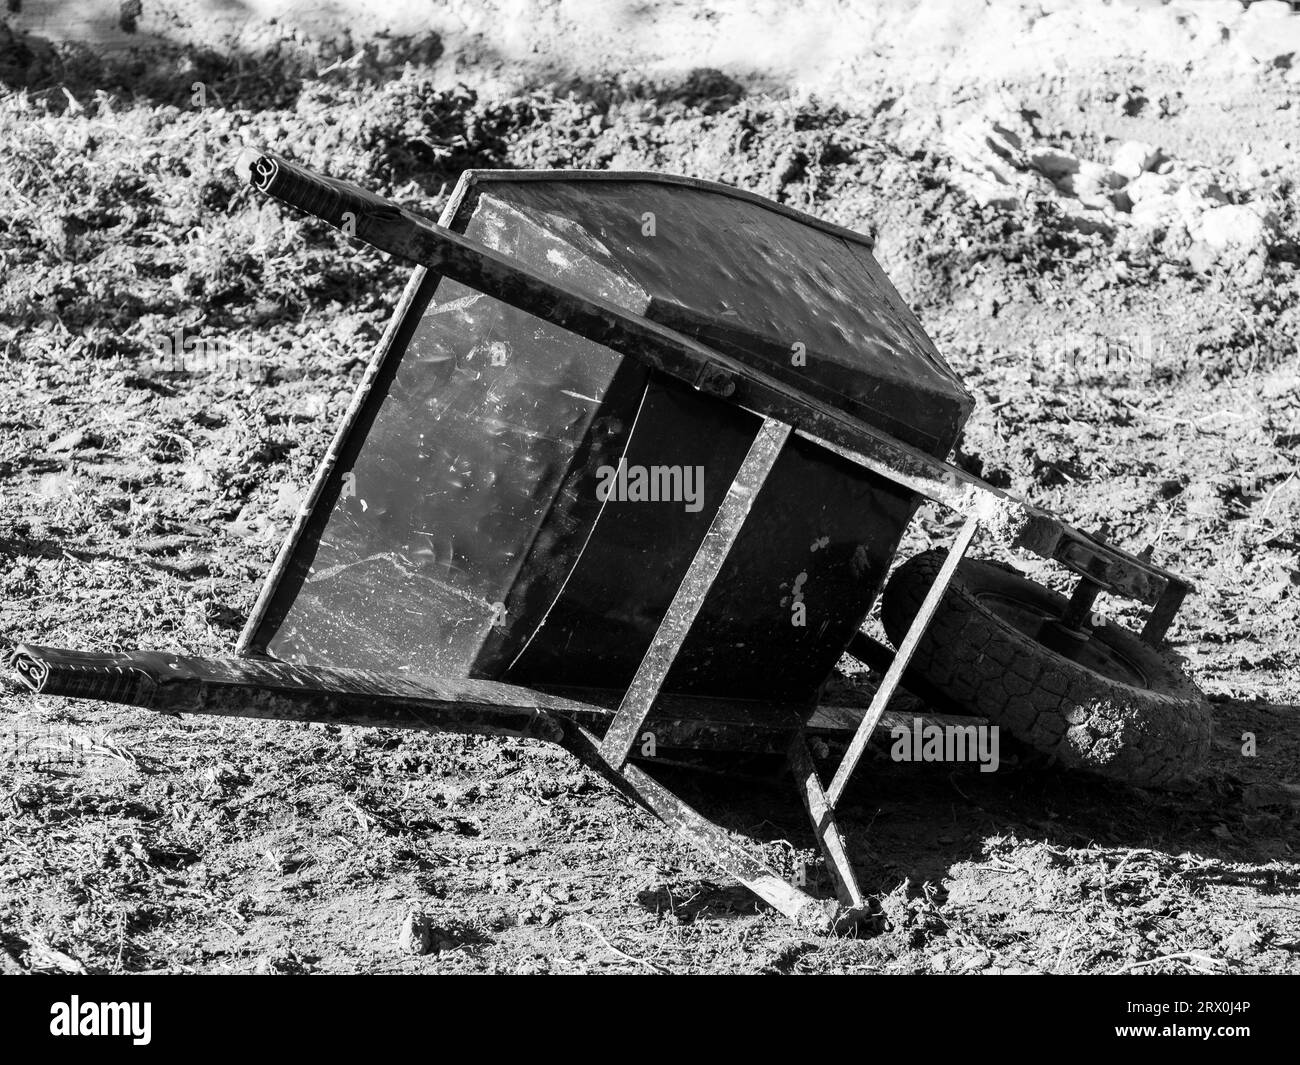 A beaten up looking old wheelbarrow lies abounded in a backyard, tools down time, lying on its side in the dirt, monochrome Stock Photo